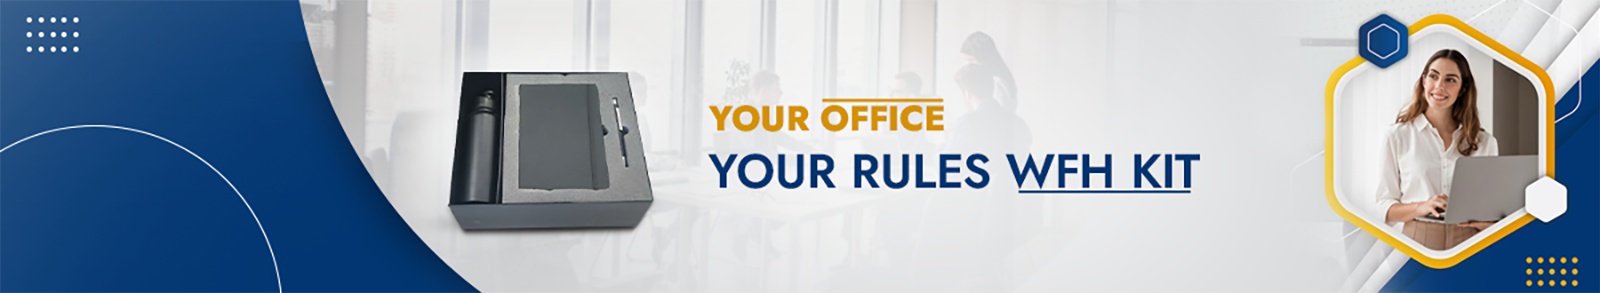 Your Office, Your Rules WFH Kit